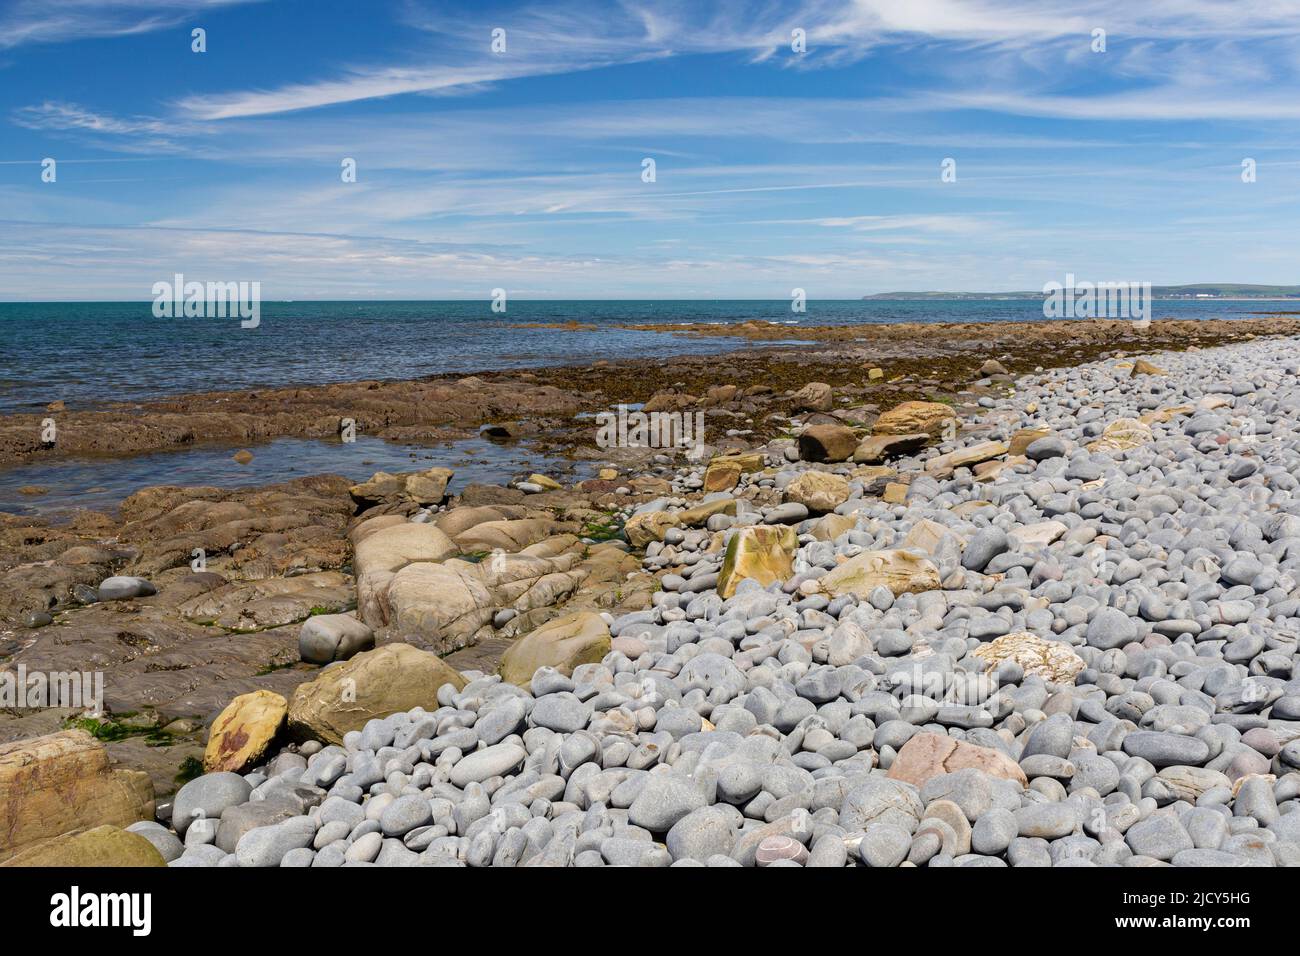 Scenic Sea View of Greencliff Beach, With Pebbles, Exposed Rocks and Coastal View Towards Croyde at Low Tide: Greencliff, Stock Photo